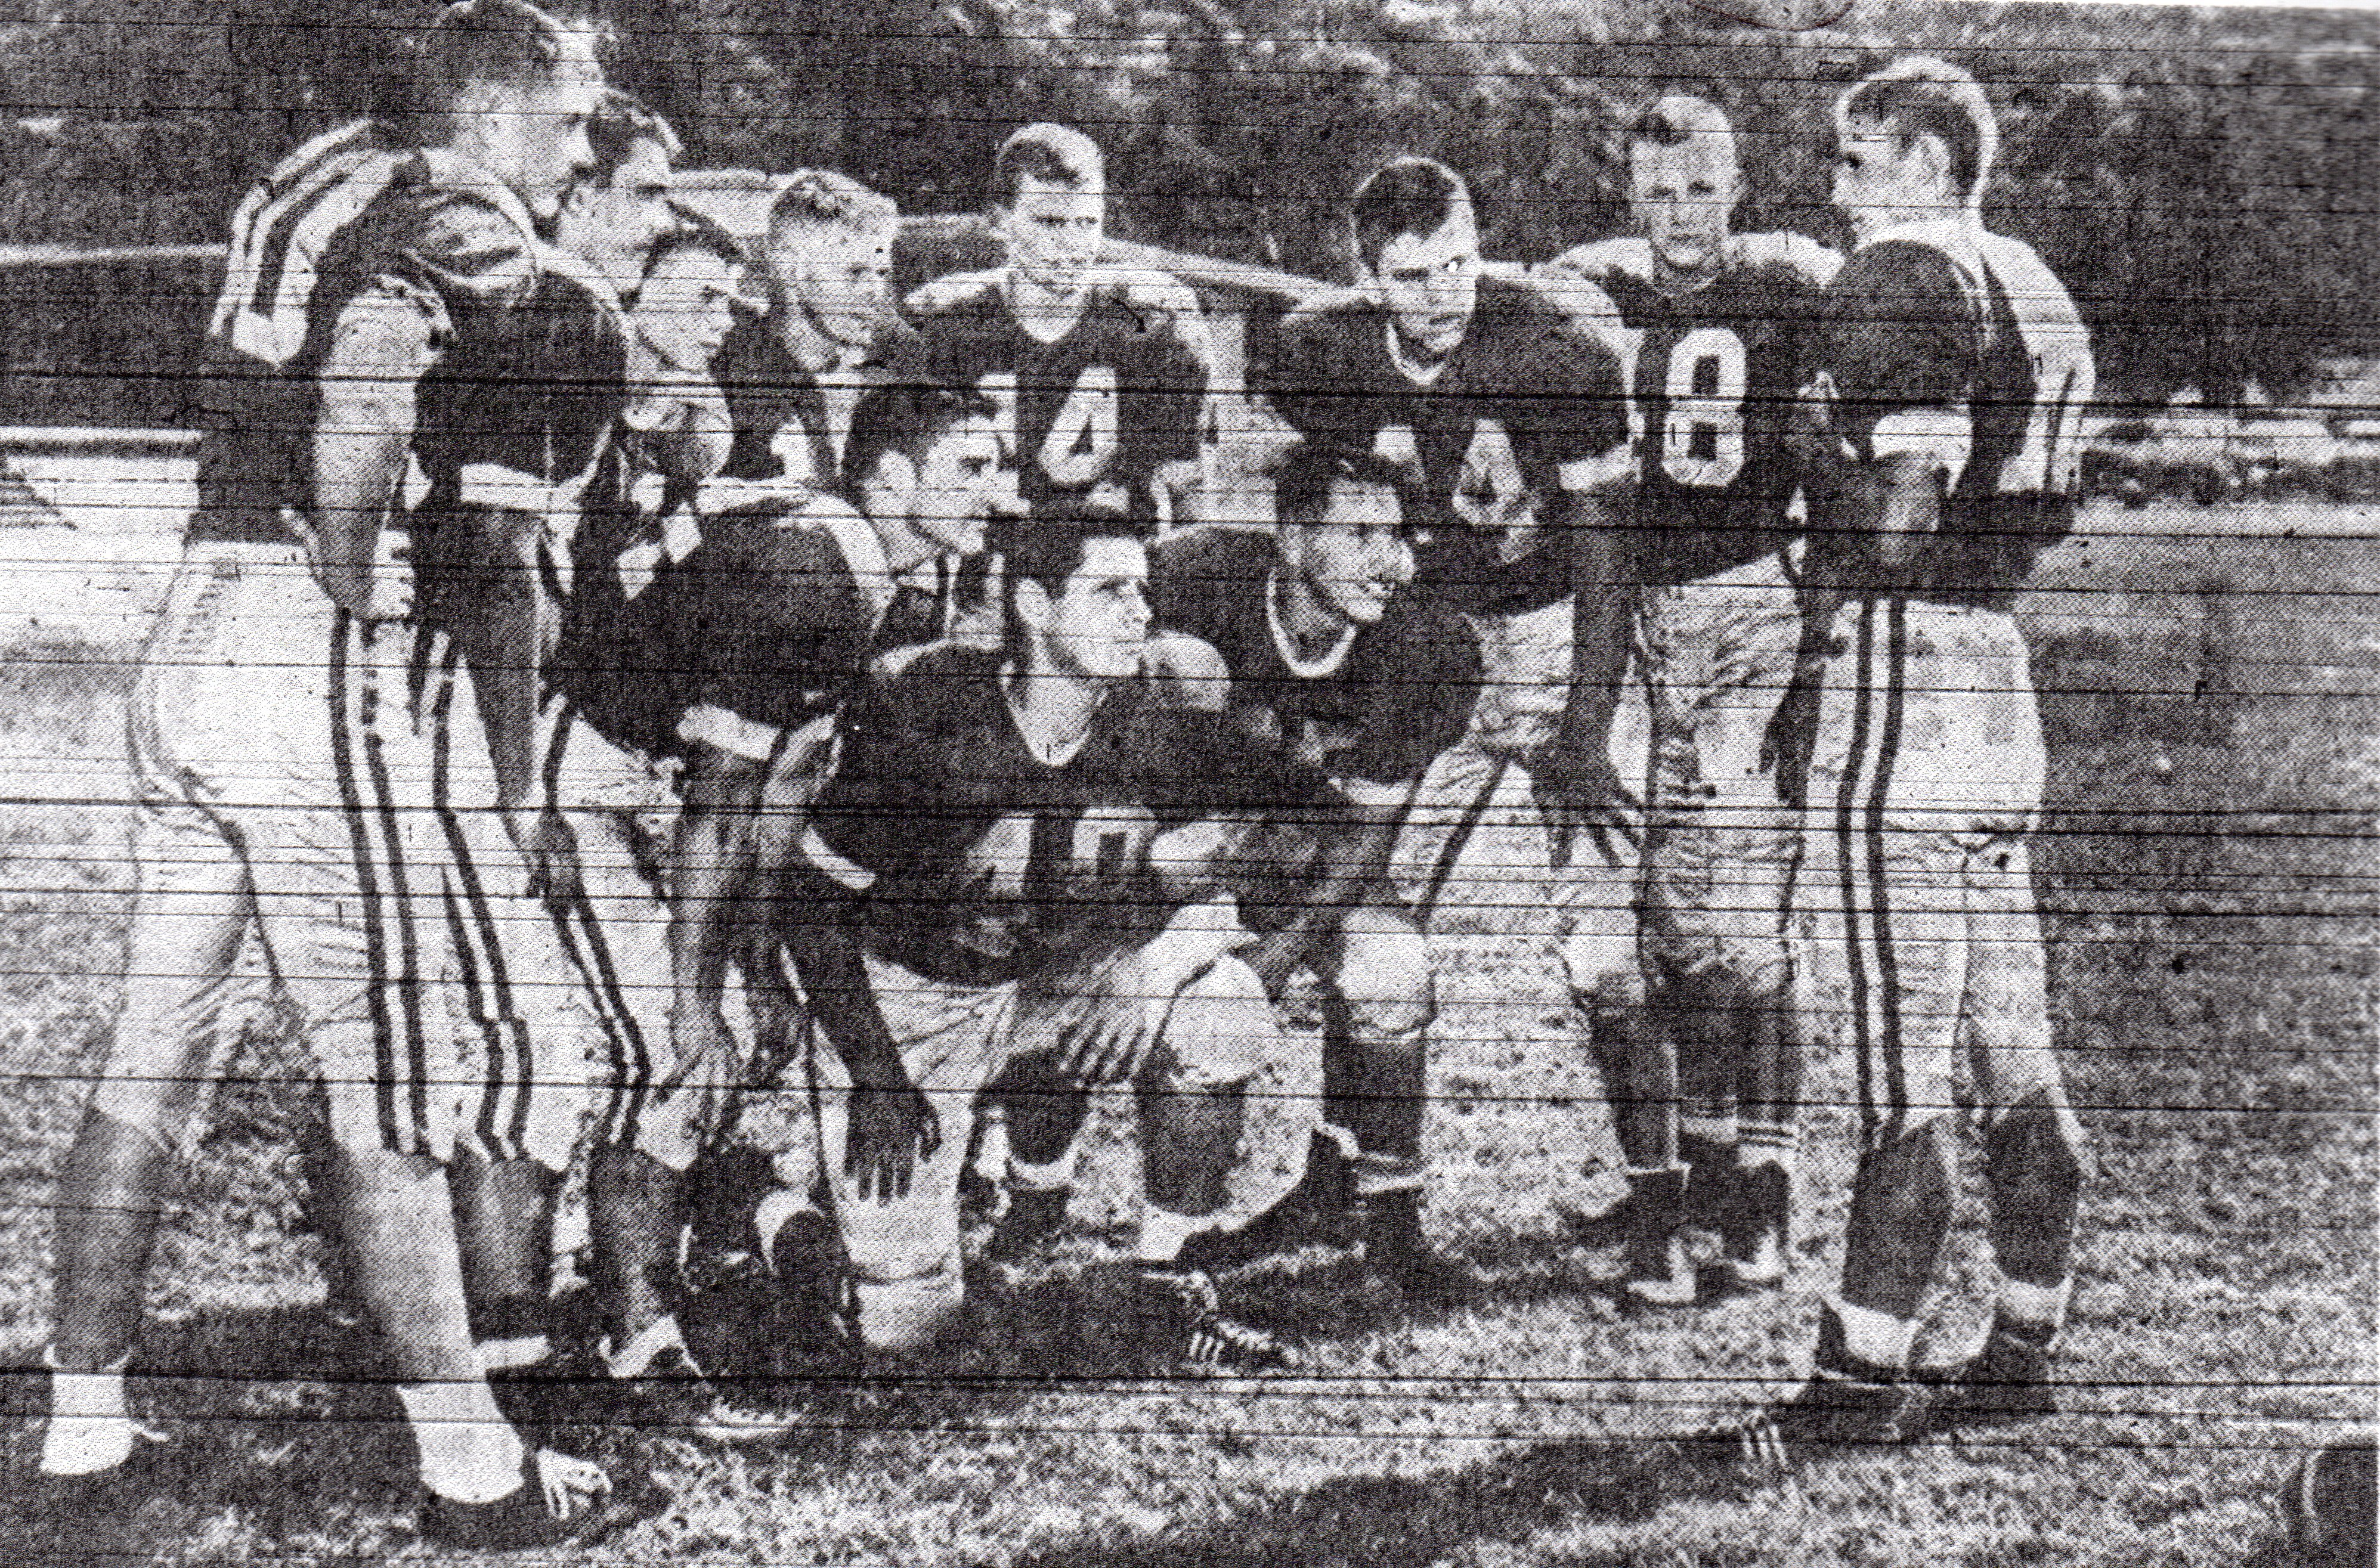 The ball is almost obscured at lower right, but significance of photo is that Grossmont quarterback Dick Cooksey huddled his team that close to the pigskin with visual signal system that involved picking colored peg from Cooksey's belt. Cooksey and Grossmont Foothillers unveiled new huddle formation at Metropolitan League carnival.